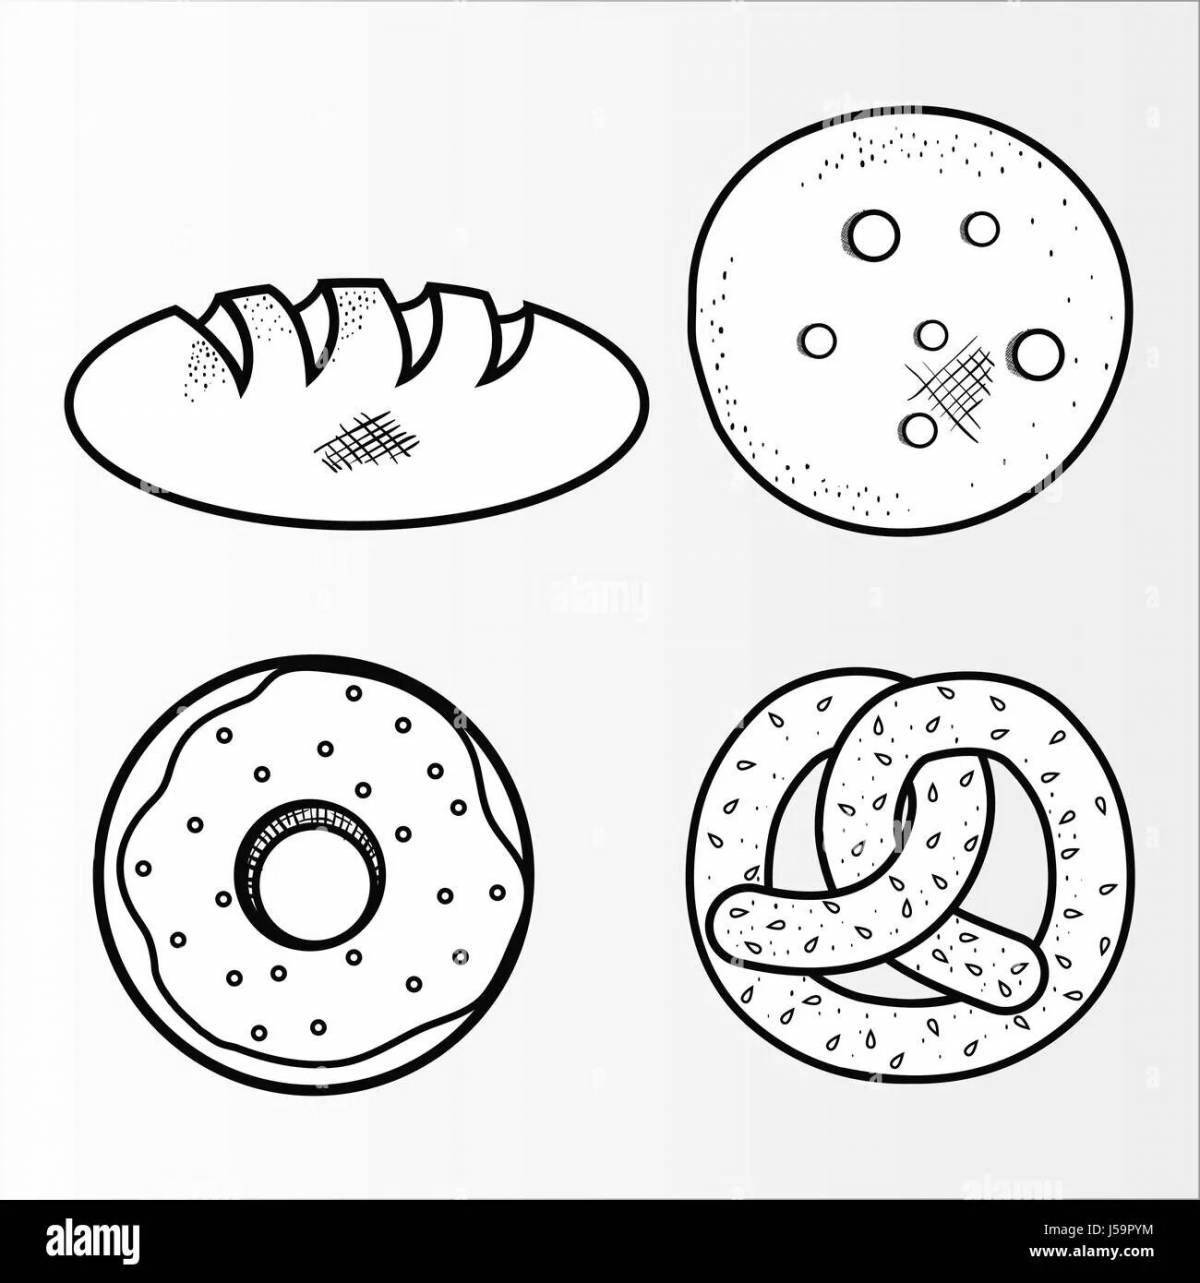 Colored cascading bagels coloring page